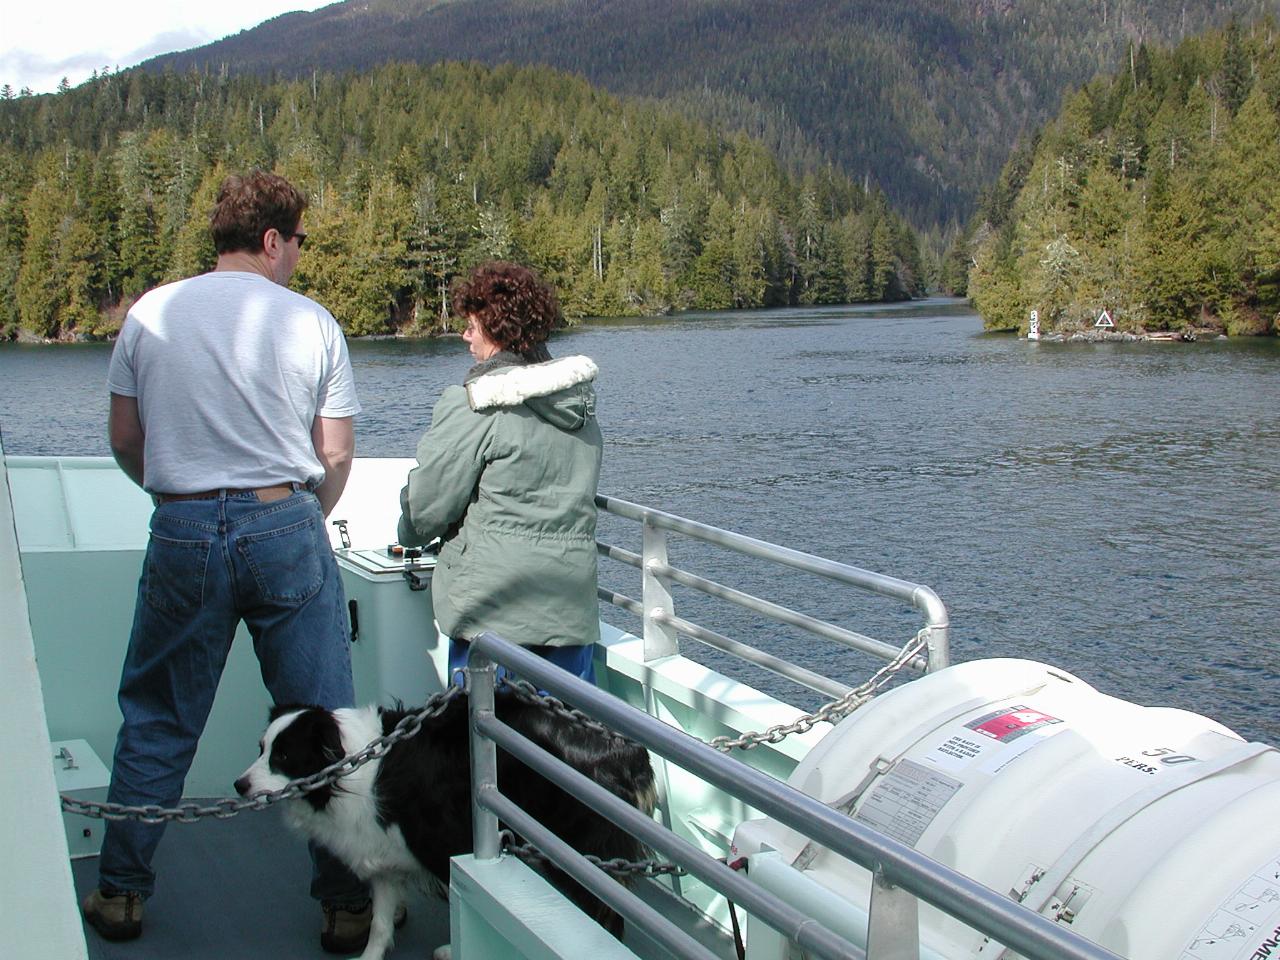 Captain Nina and Tom discuss entrance plan, with Phrater on guard